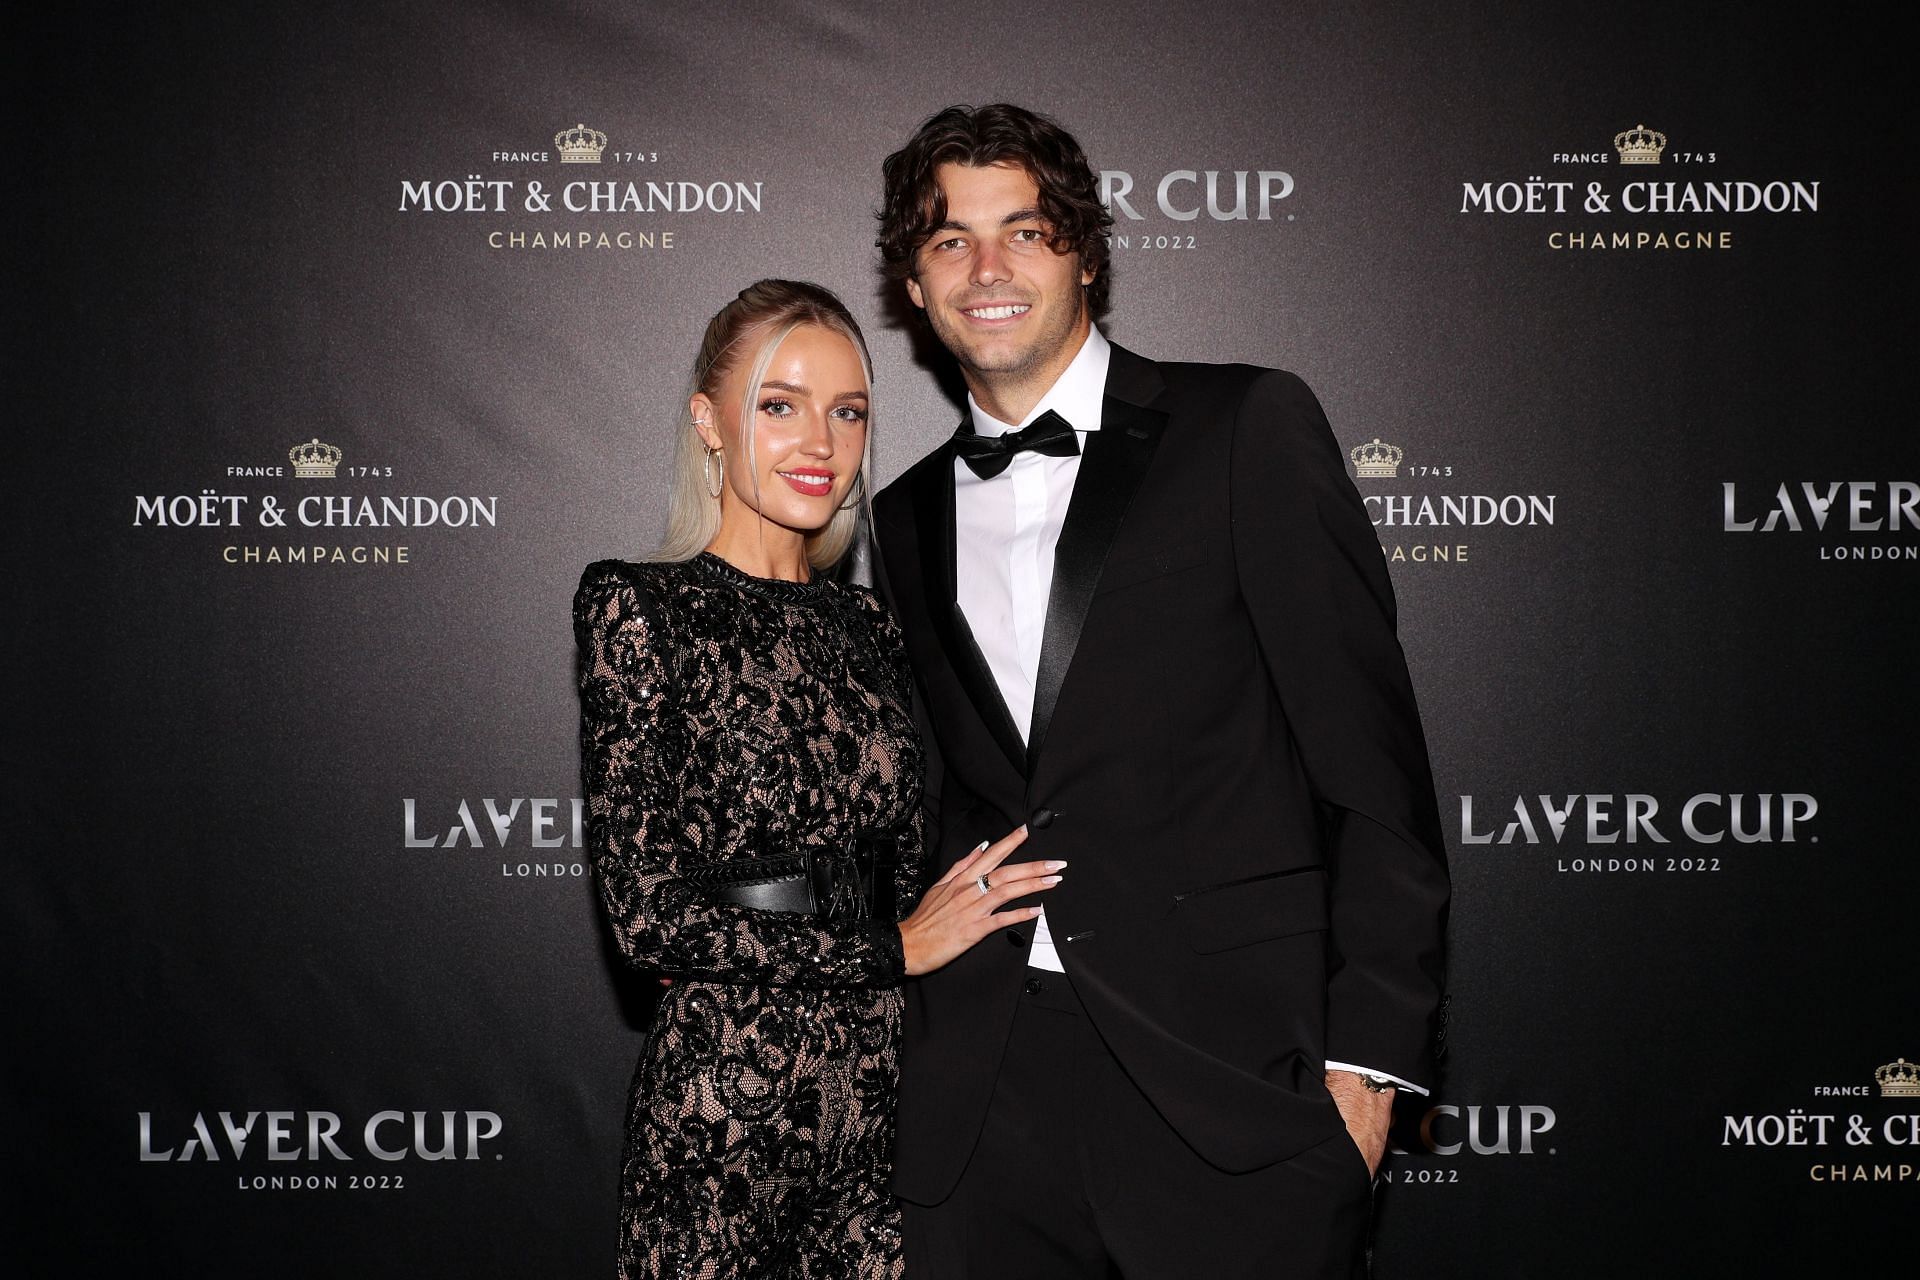 Taylor Fritz pictured with Morgan Riddle at the Laver Cup 2022 - Previews.